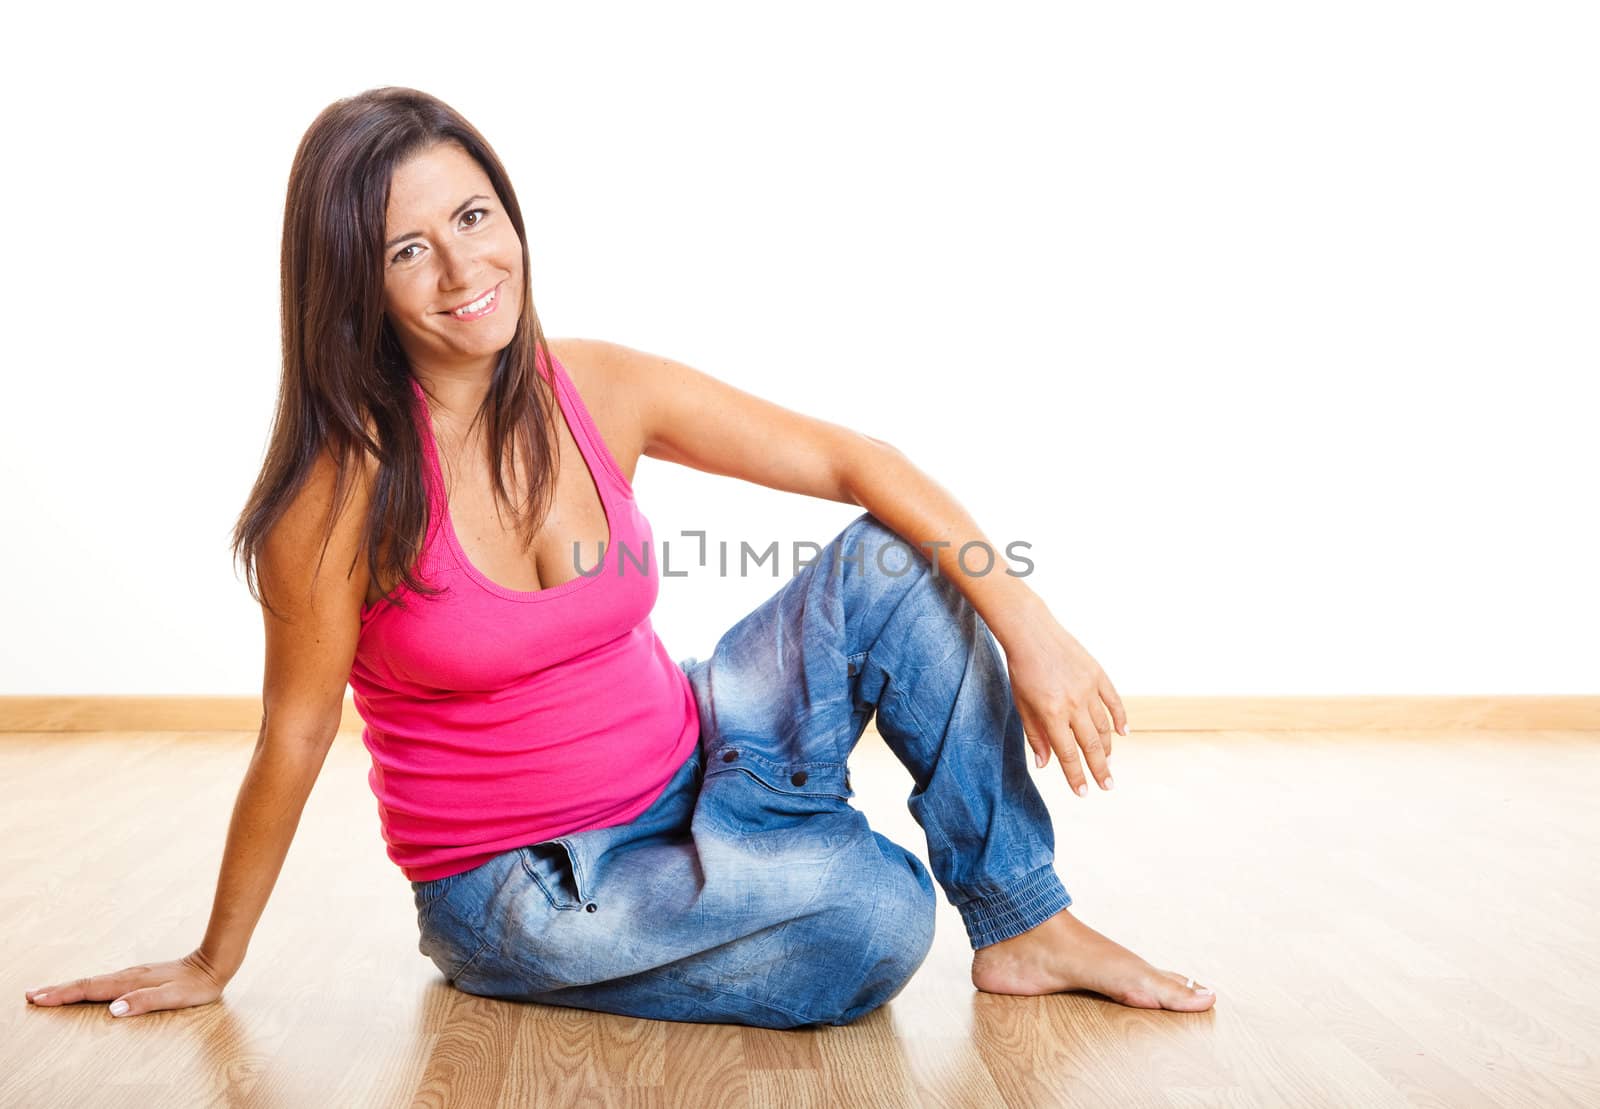 Beautiful and happy pregnant woman isolated oin white